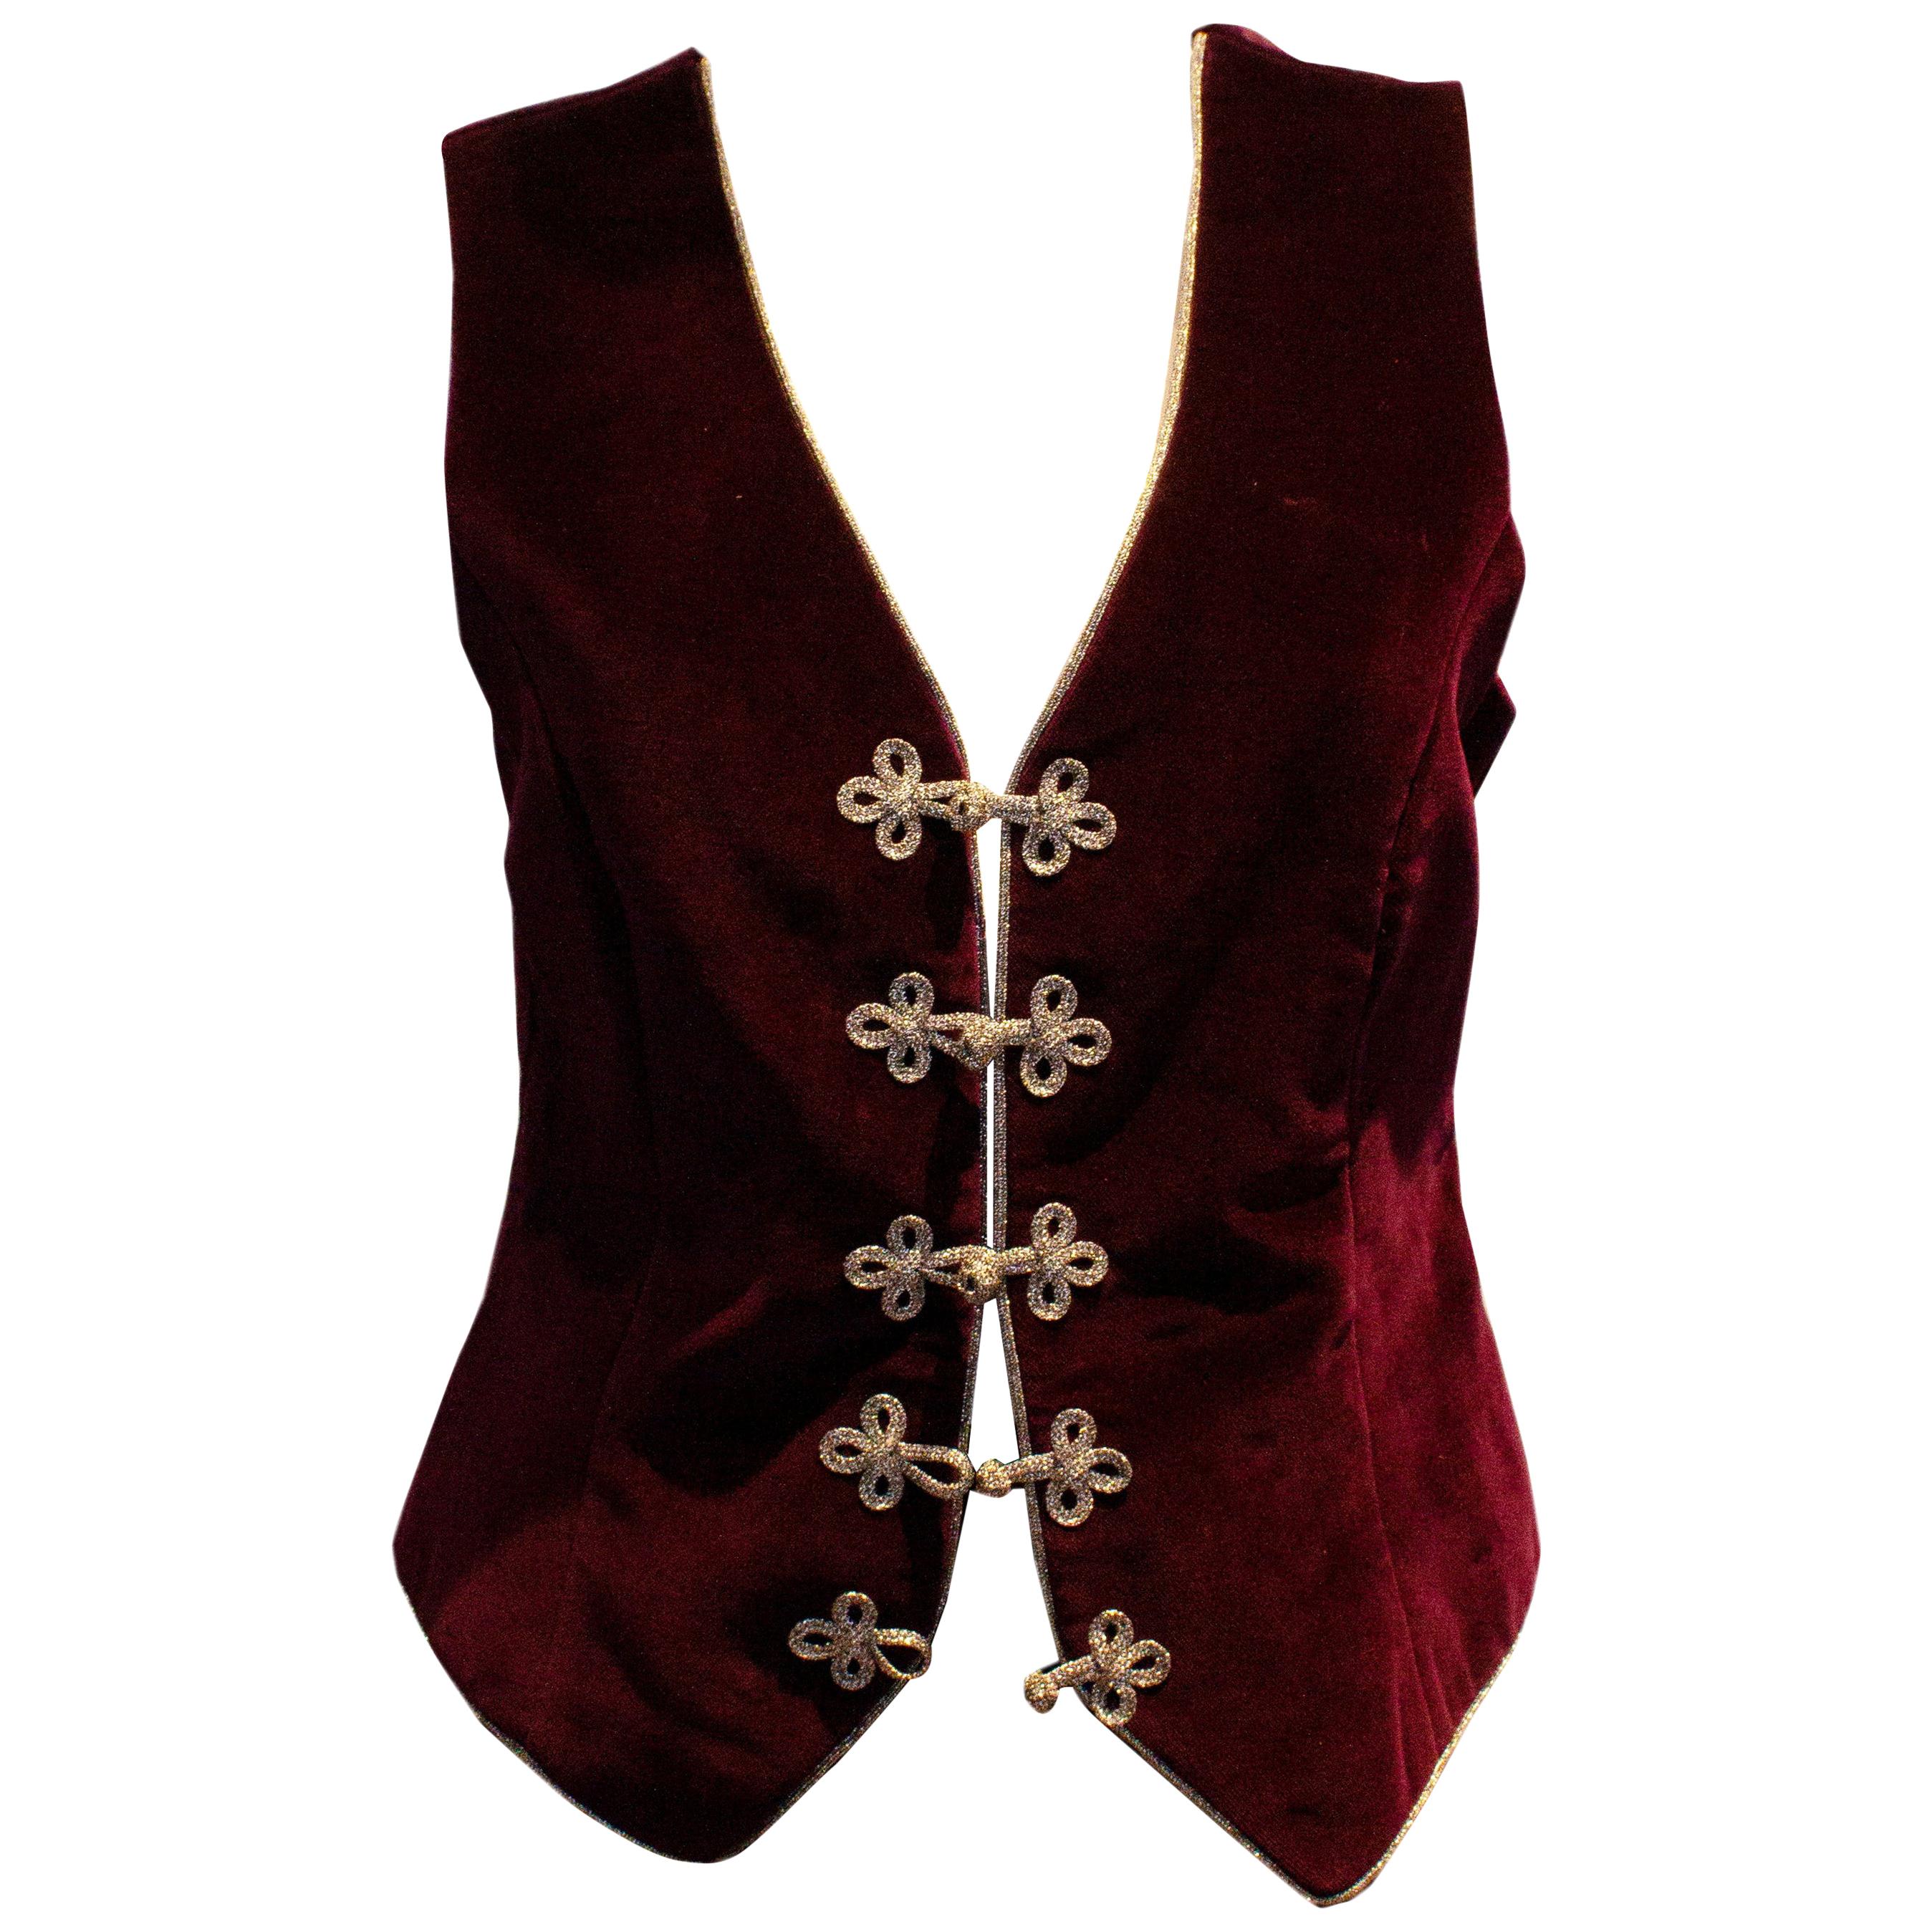  Stunning Silk Velvet Neal and Palmer Waistcoat with Silver Trim For Sale